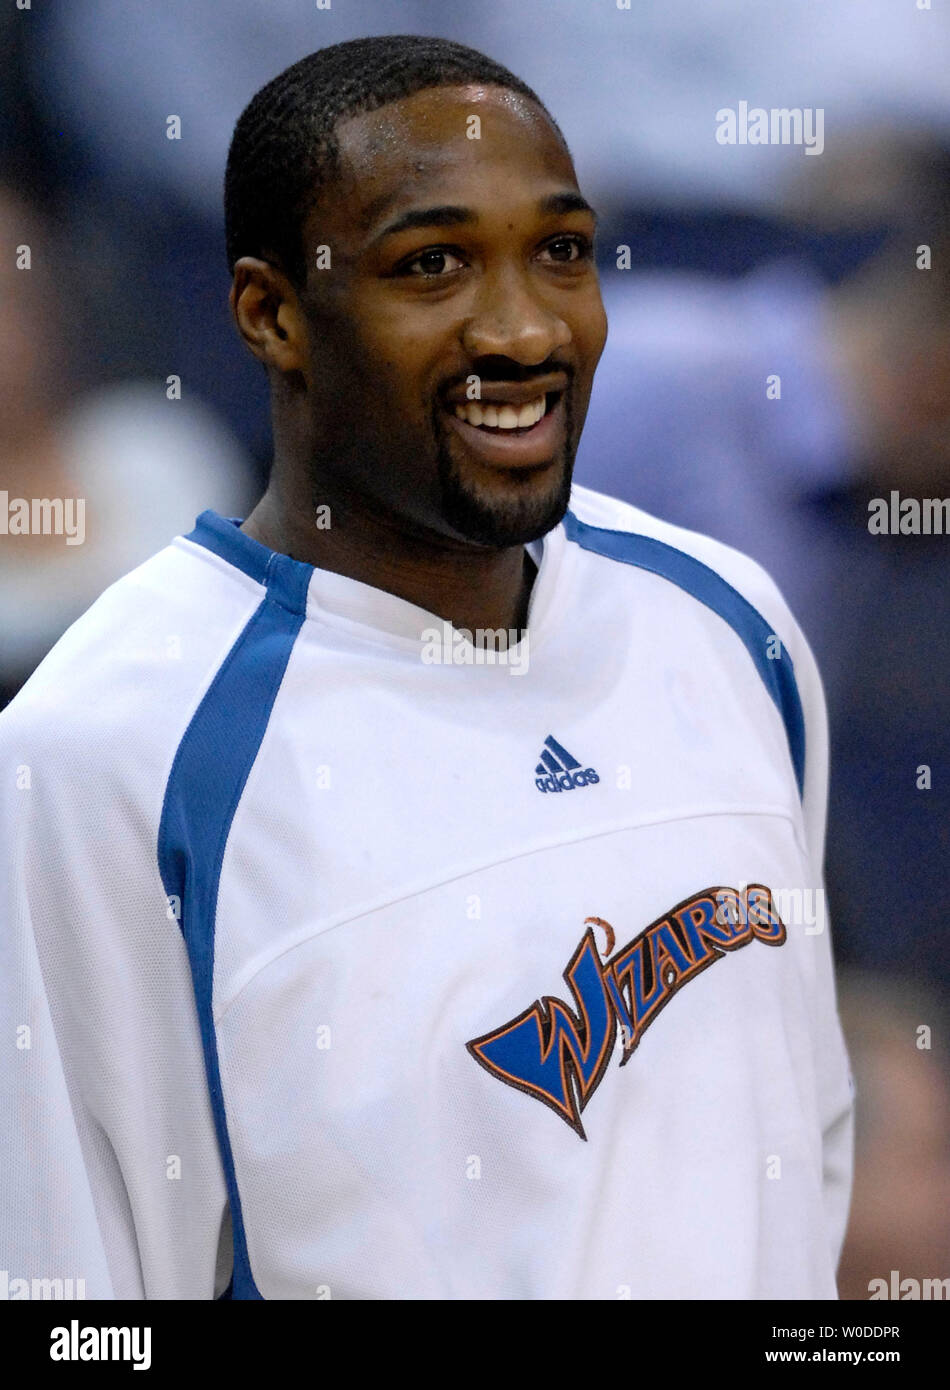 Washington Wizards Gilbert Arenas warms-up prior to the Wizards game  against the San Antonio Spurs at the Verizon Center in Washington on  January 2, 2010. Arenas allegedly drew a gun on teammate